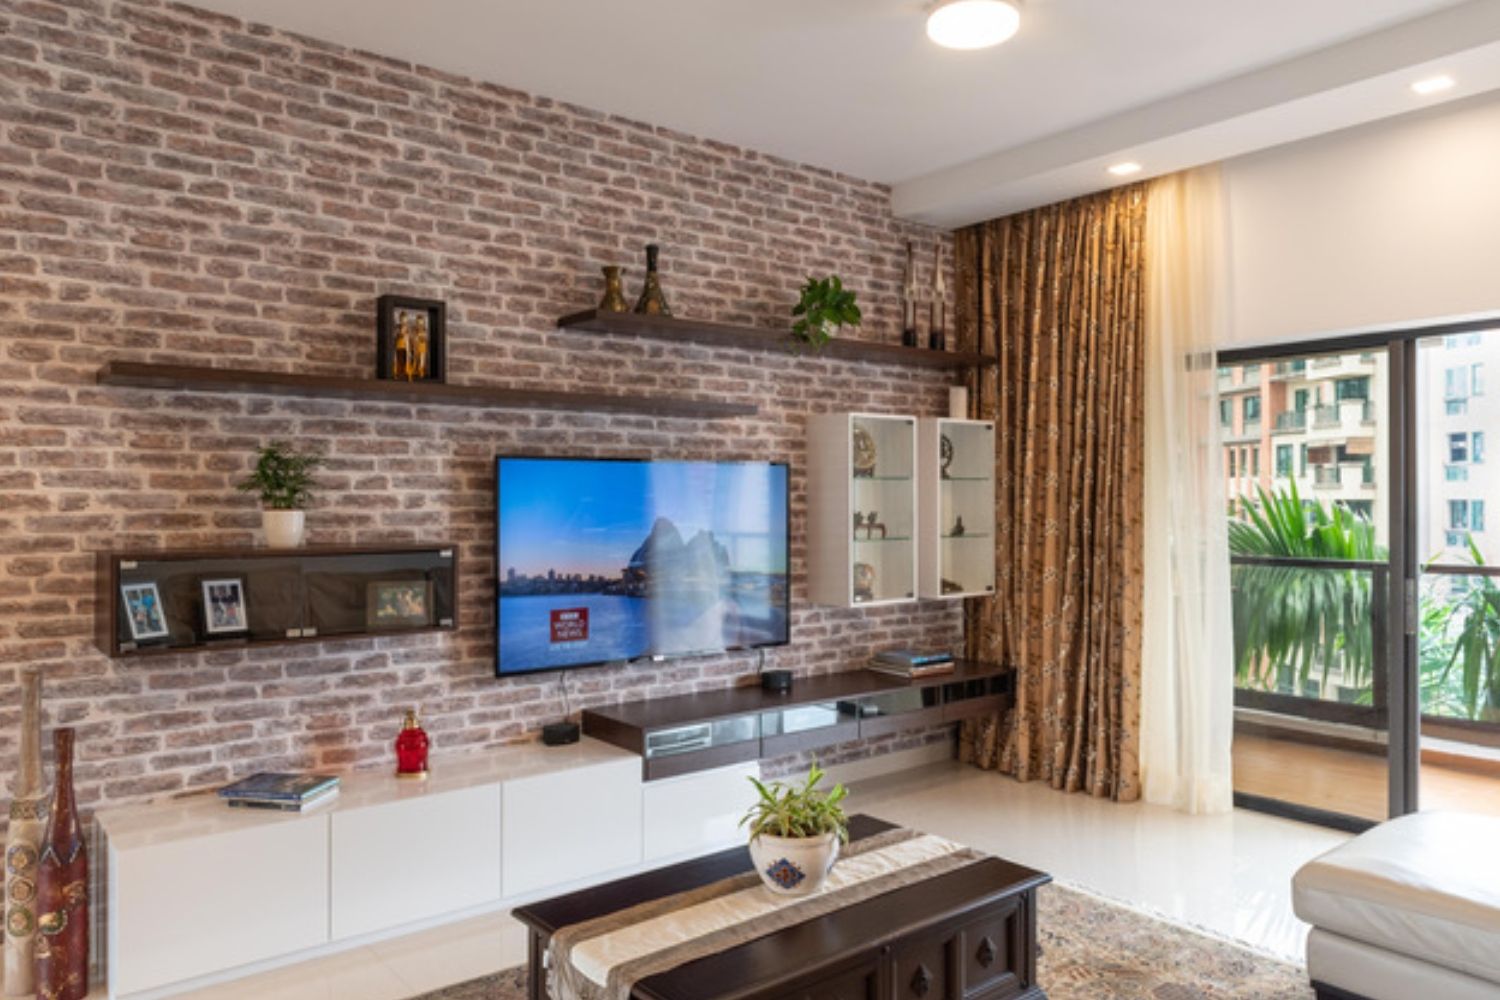 Contemporary Wall Design With Brick-Textured Wallpaper